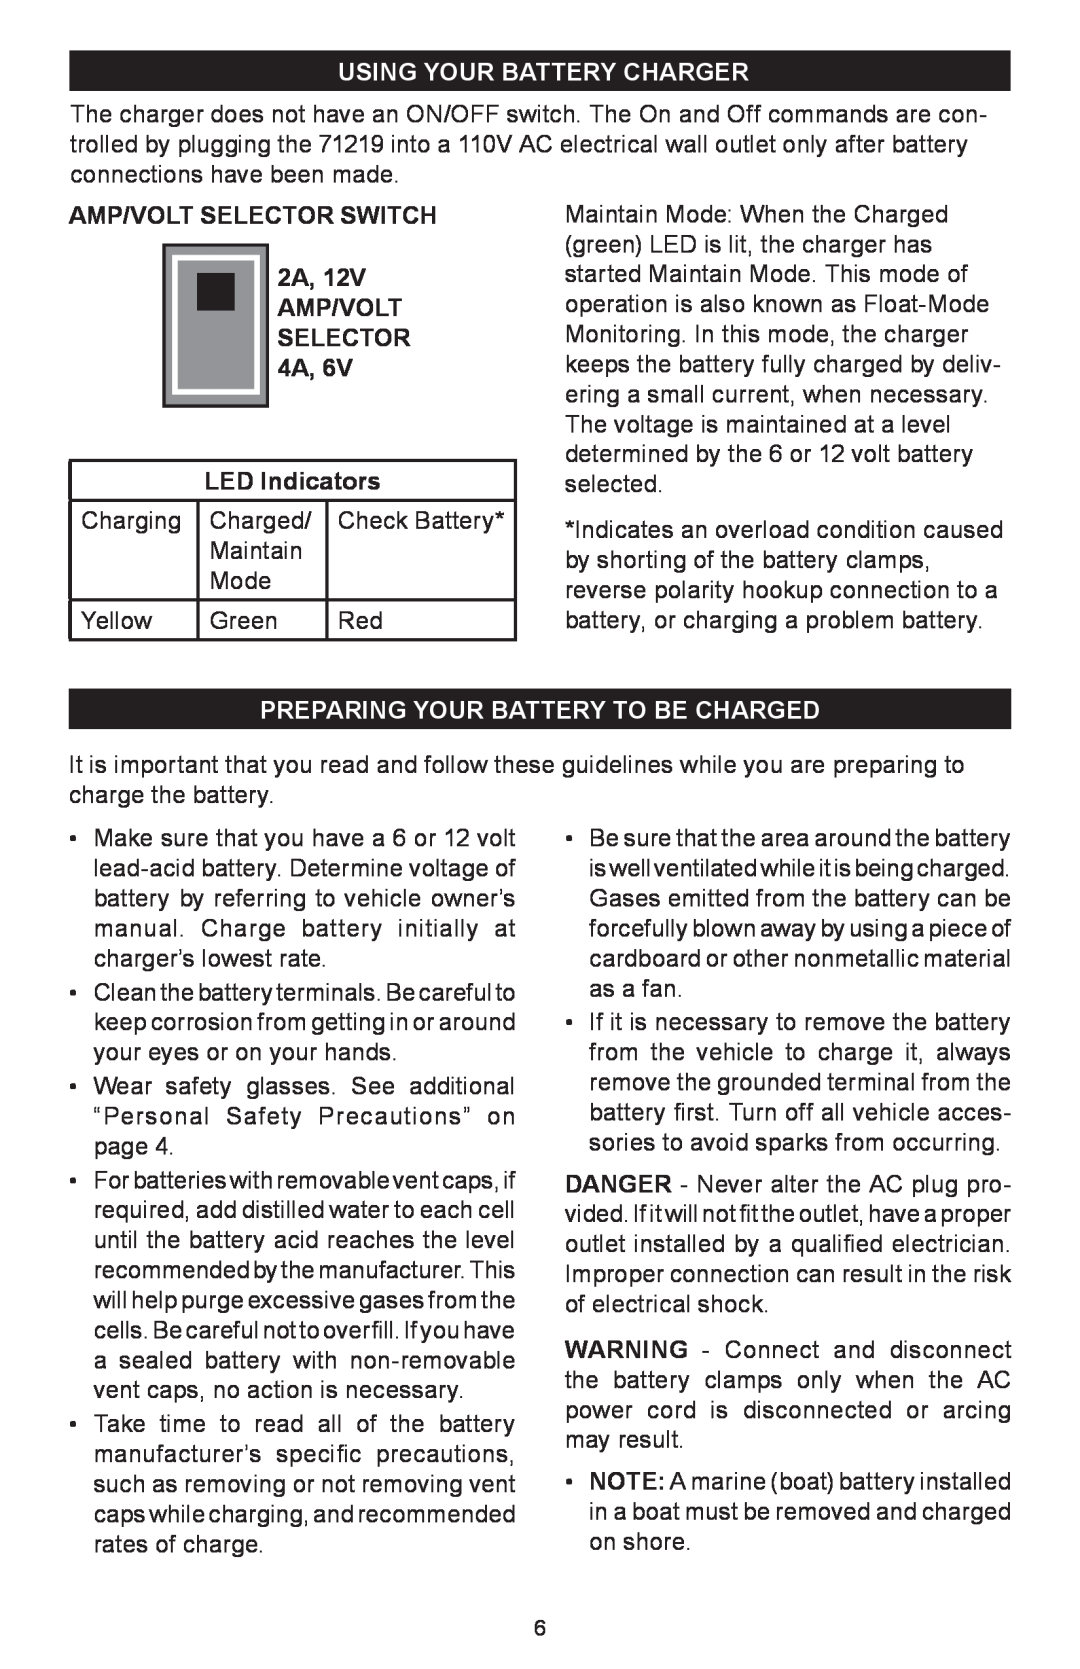 Sears 200.71219 owner manual Using Your Battery Charger, Preparing your battery to be charged 